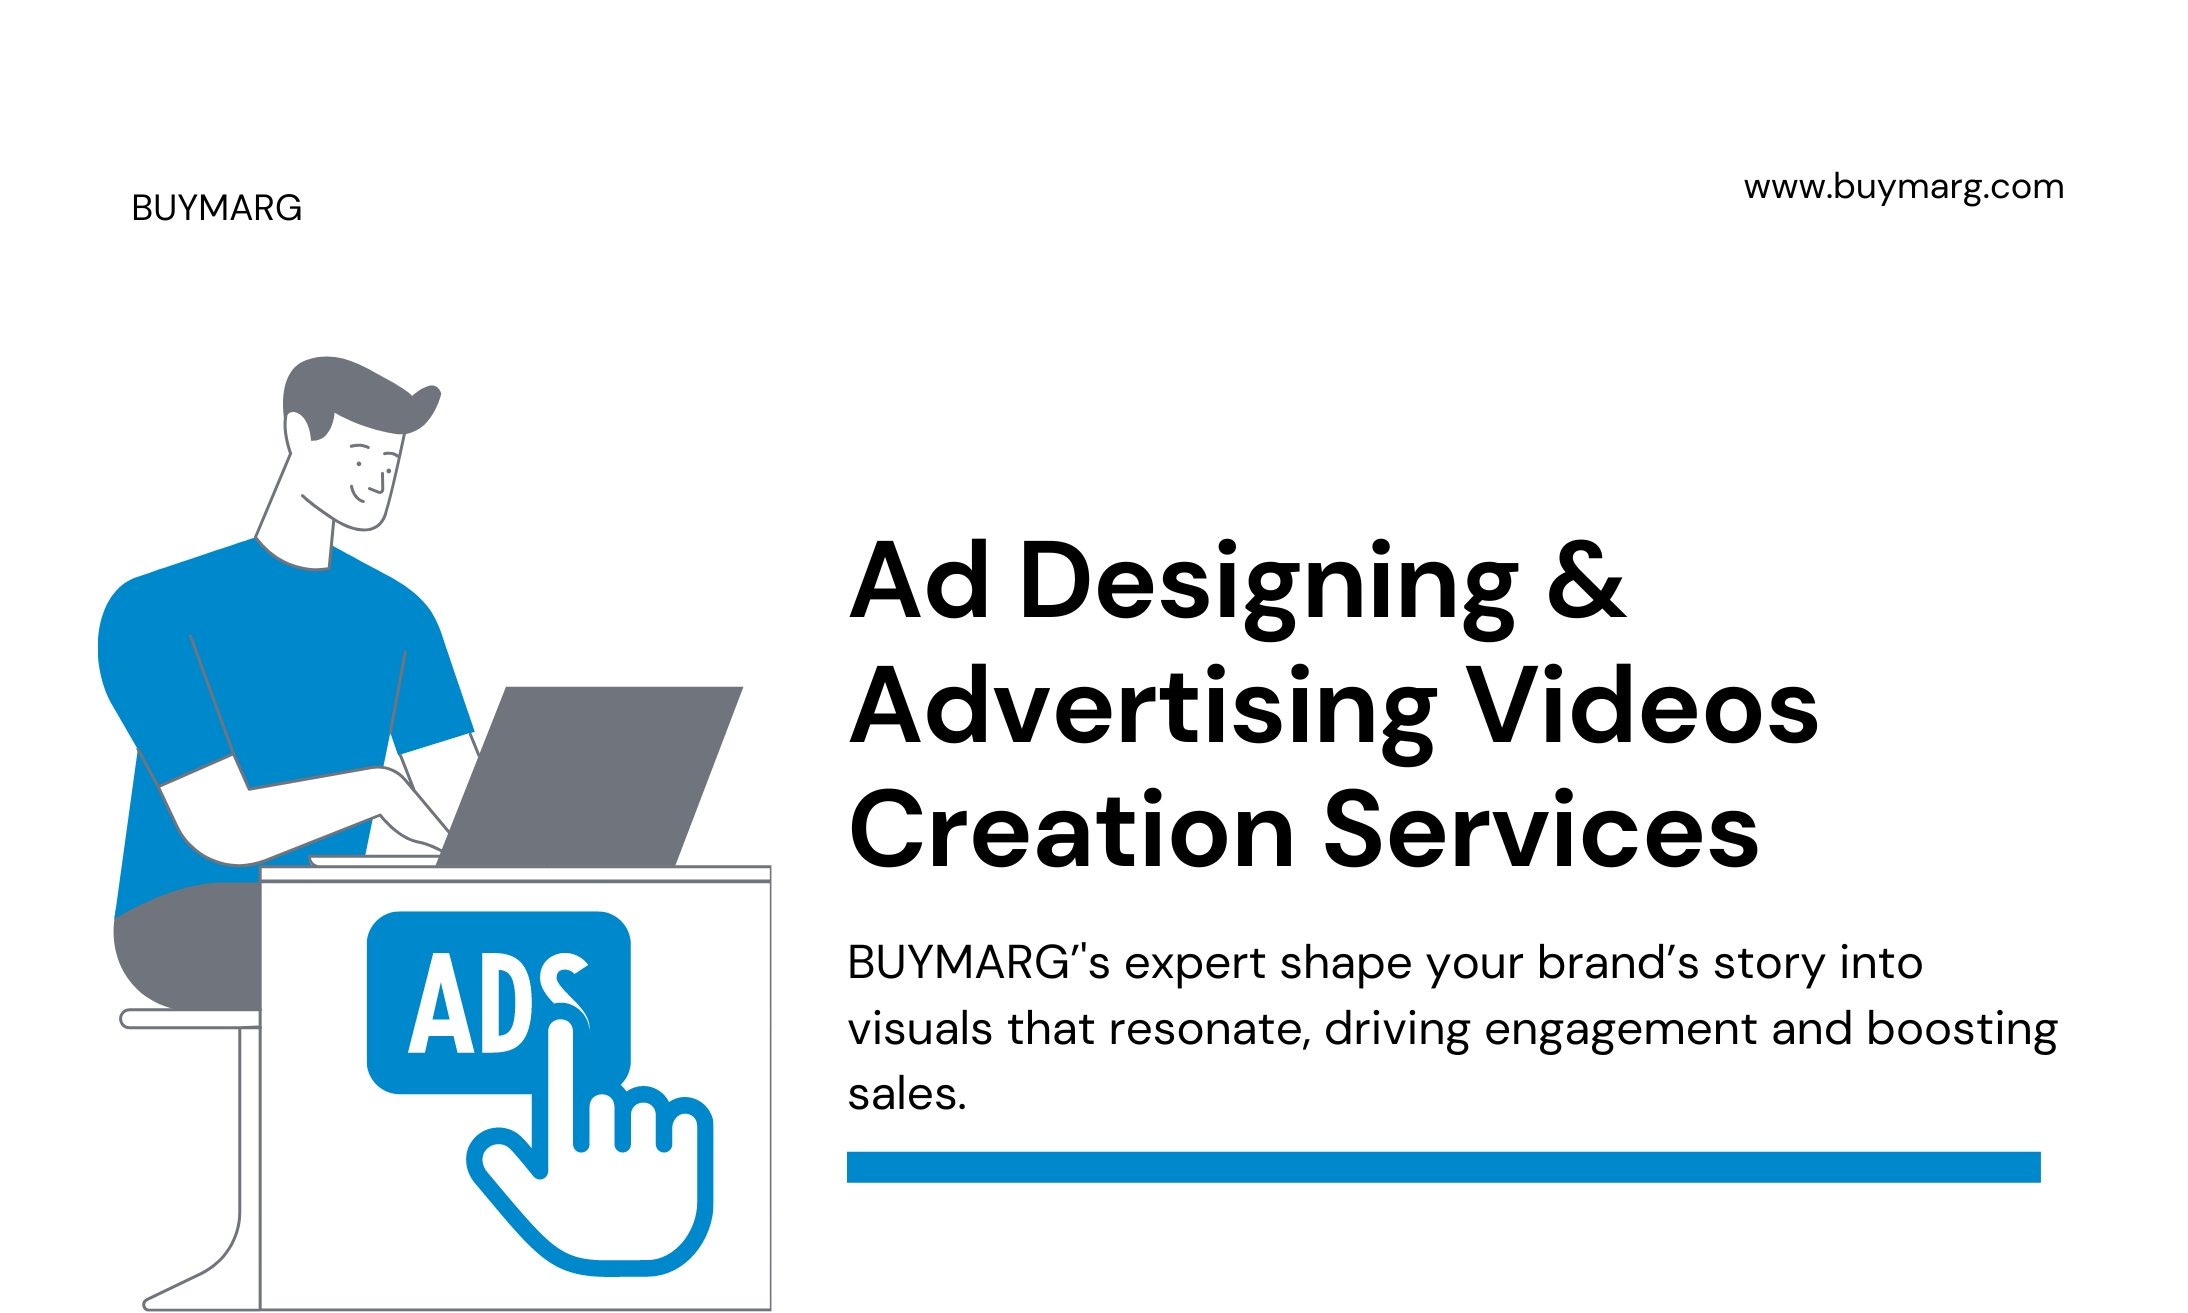 Ad Designing & Advertising Videos Creation Services